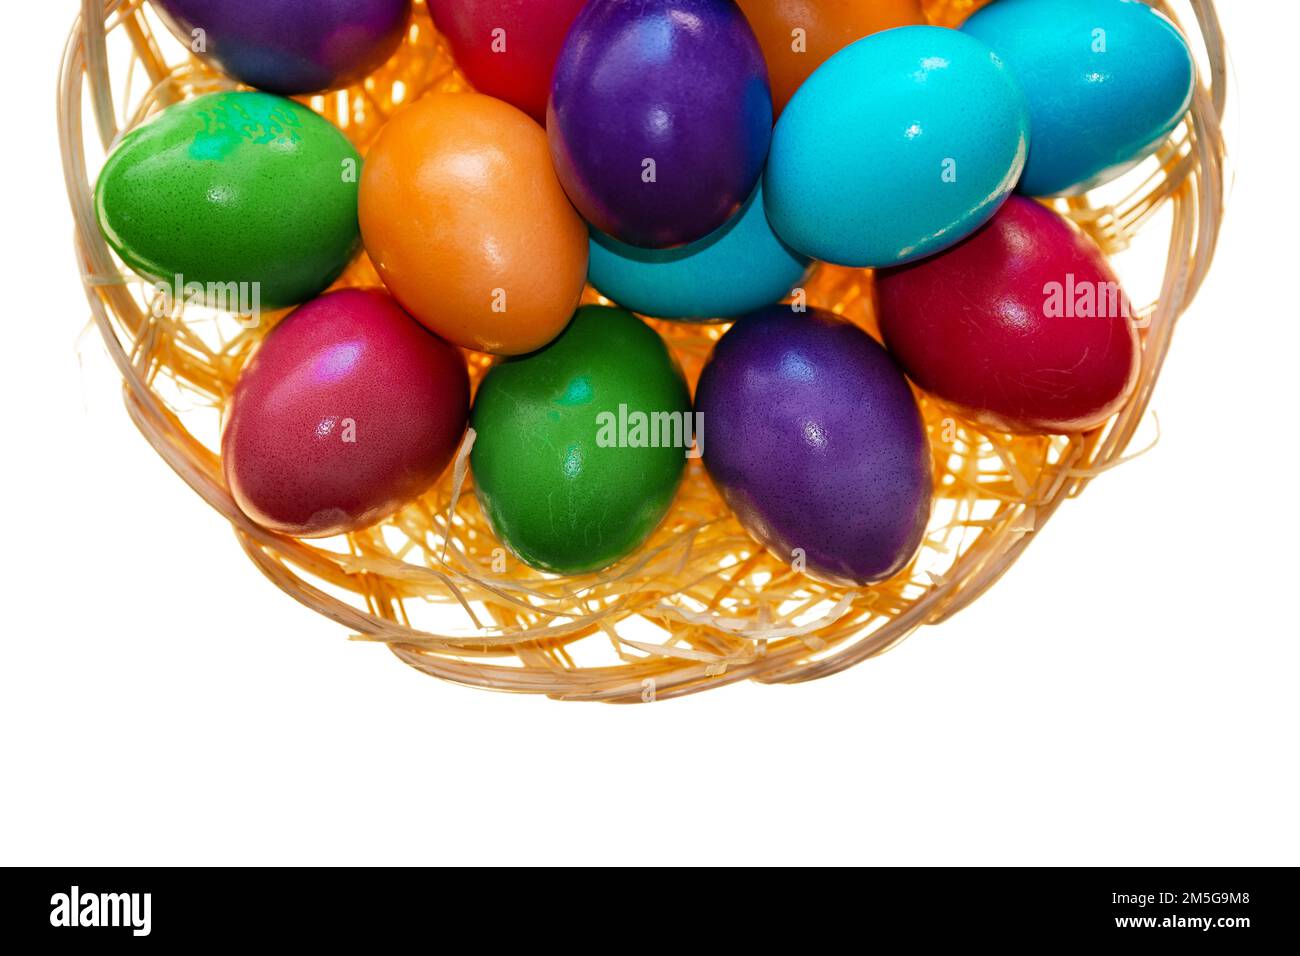 Easter tradition.multicolored painted eggs close-up in a bowl on a white background.Easter food. Spring religious holiday symbol. Christian and Stock Photo